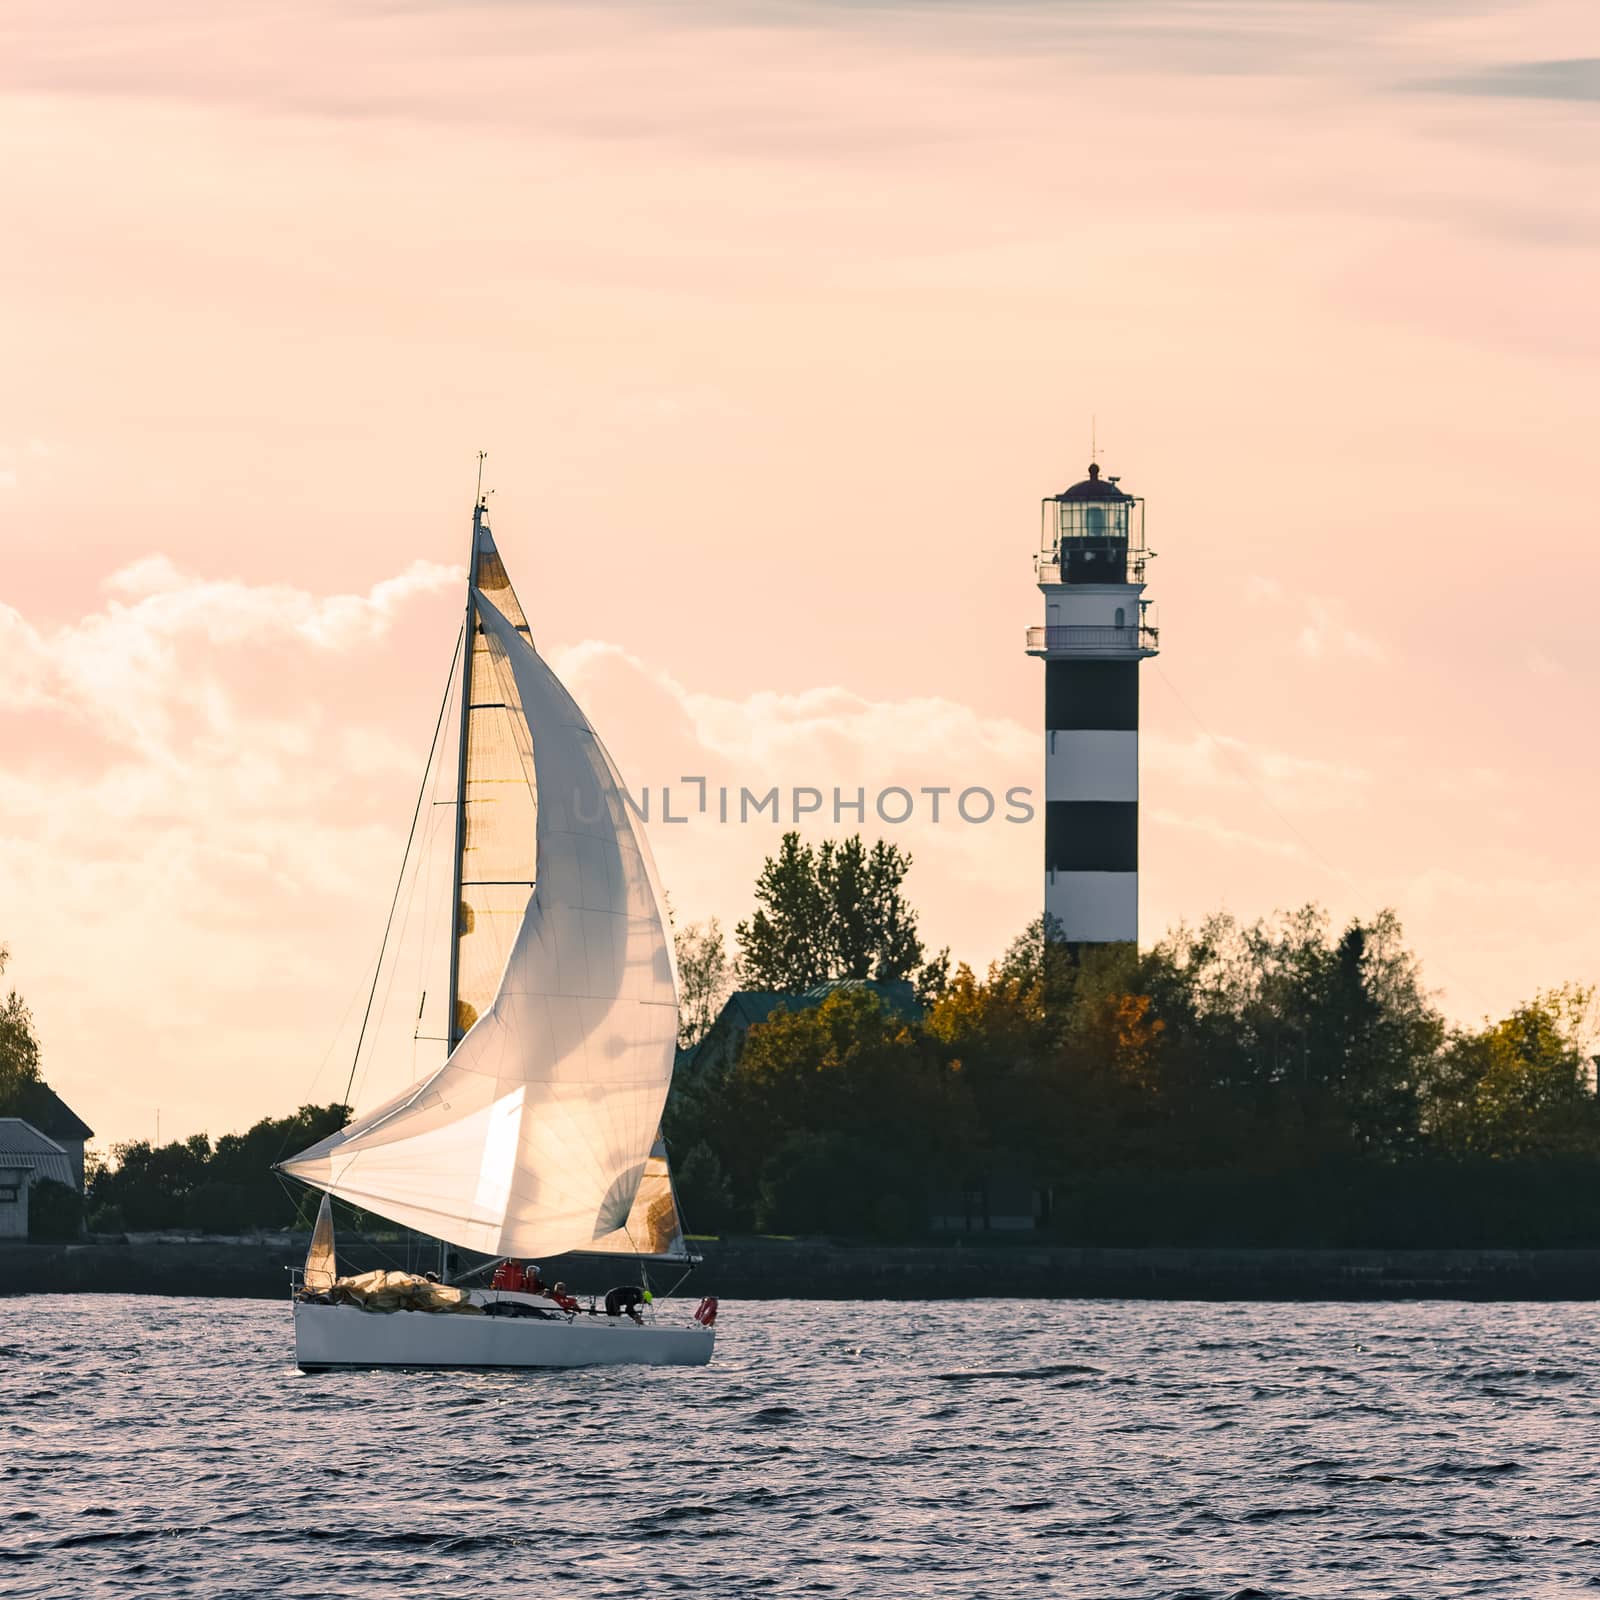 Sailboat moving past the big lighthouse in evening, Latvia